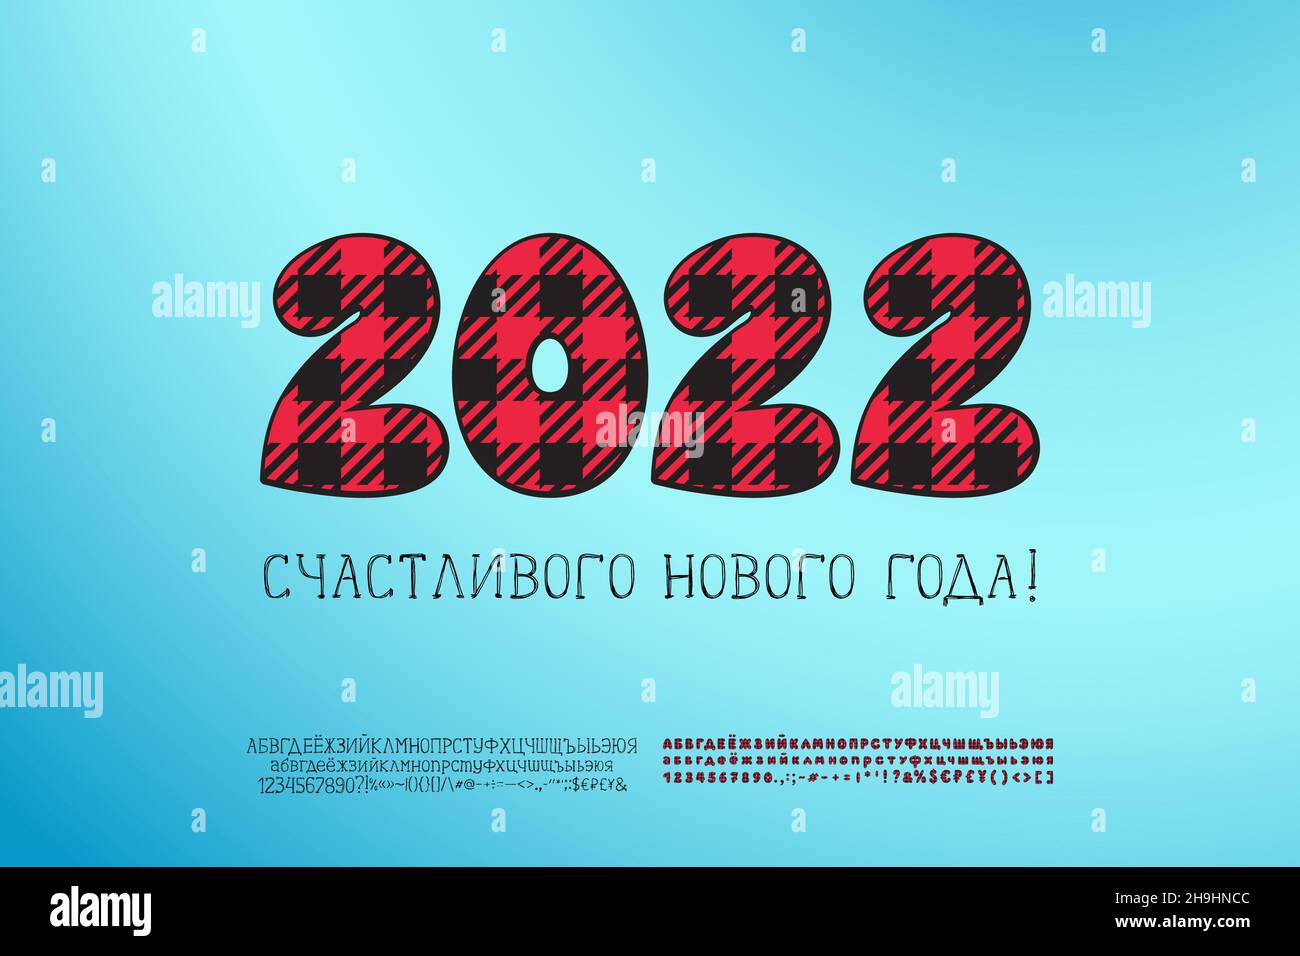 Decorative flyer Happy New Year, Russian language. Cartoon numbers with plaid pattern on blue gradient background. Two vector fonts sets are included. Stock Vector